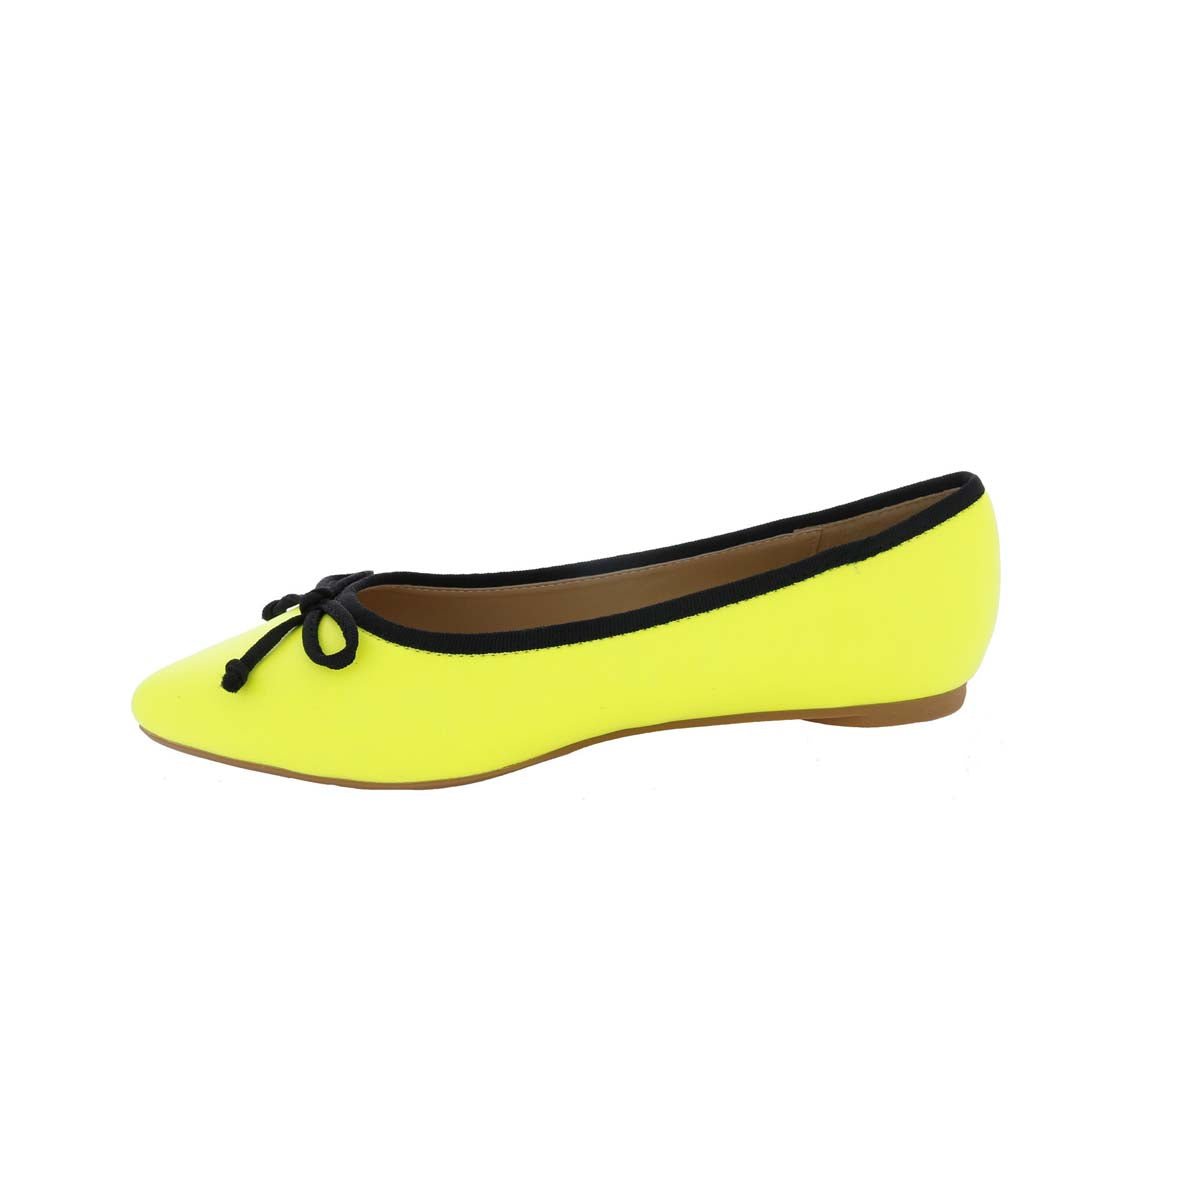 PENNY LOVES KENNY ATTACK WOMEN FLATS SLIP-ON SHOE IN YELLOW NEON SYNTHETIC - TLW Shoes